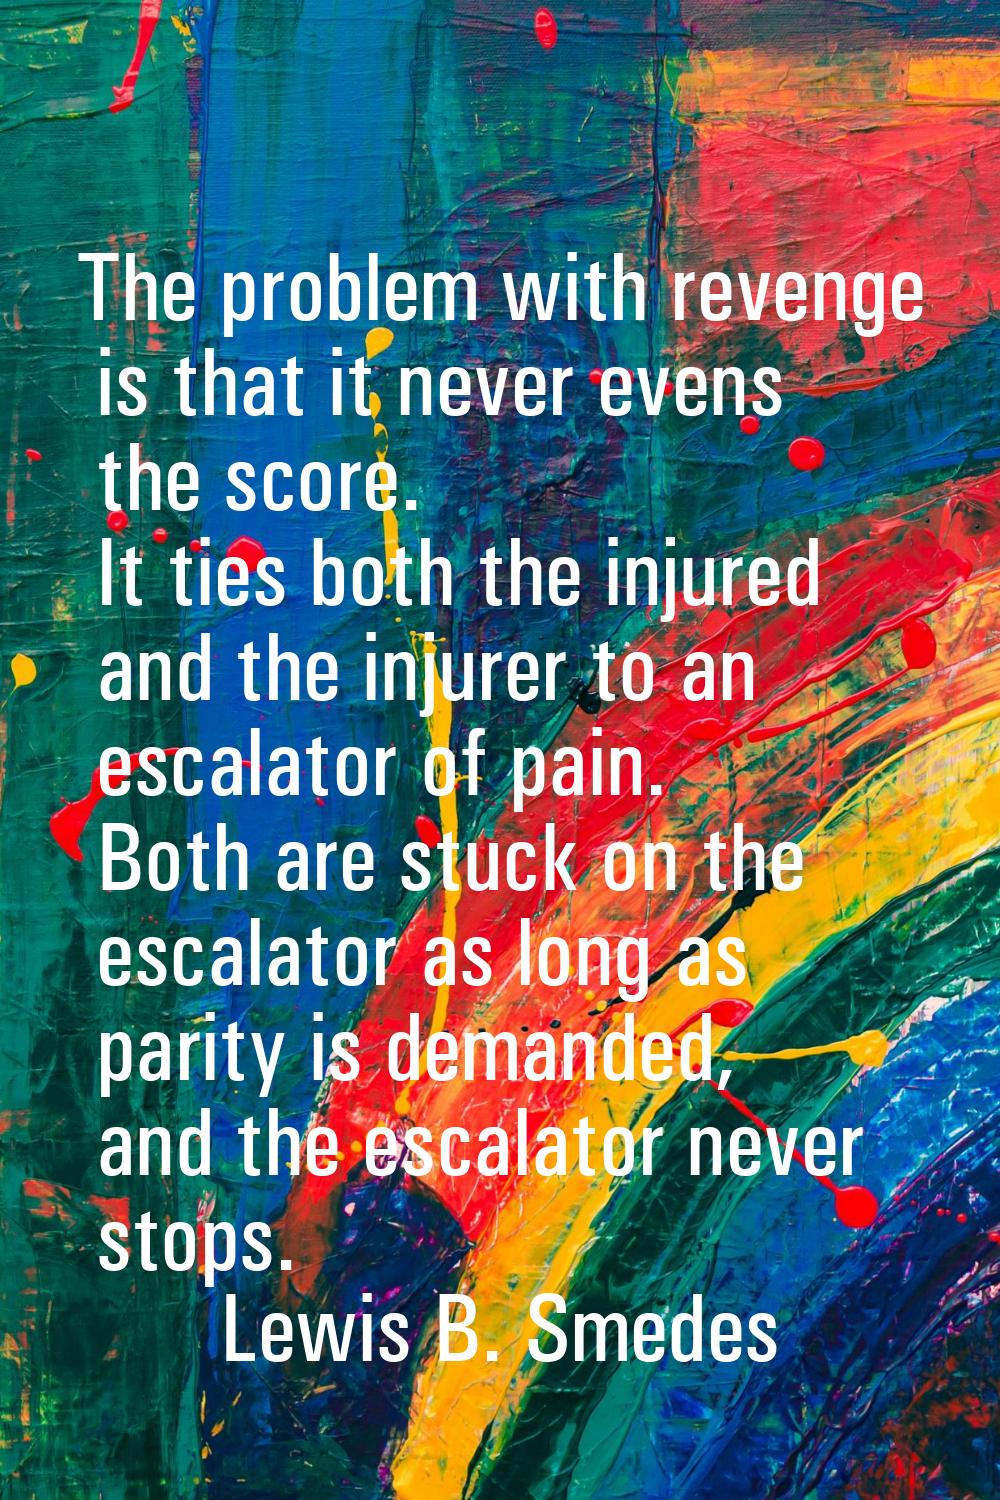 The problem with revenge is that it never evens the score. It ties both the injured and the injurer